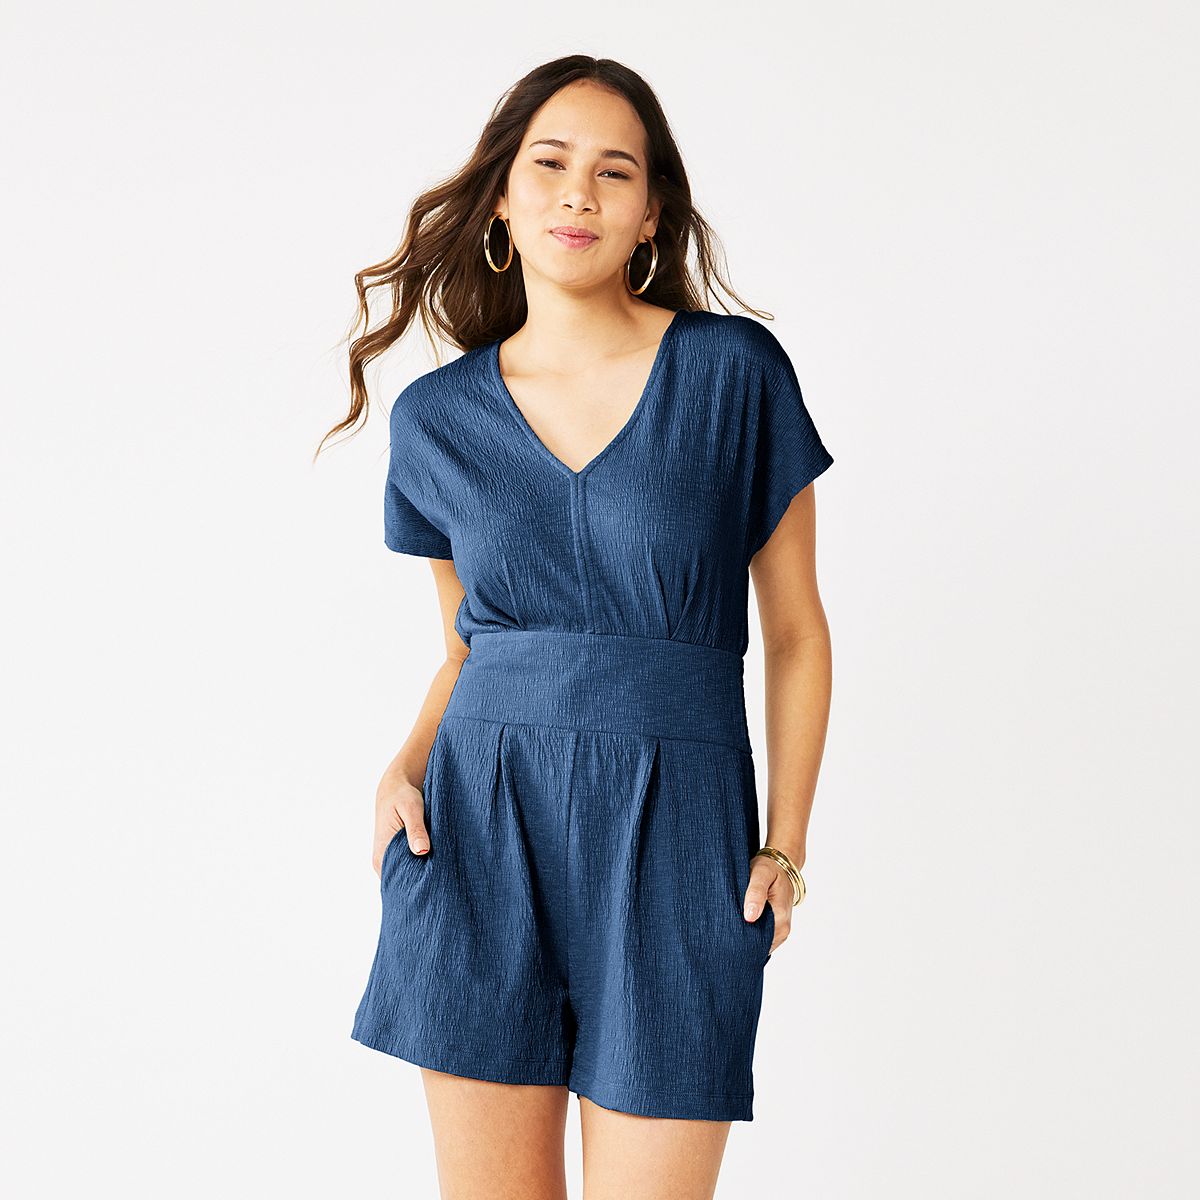 Keep Your Cool With Beautiful Summer Rompers For Women